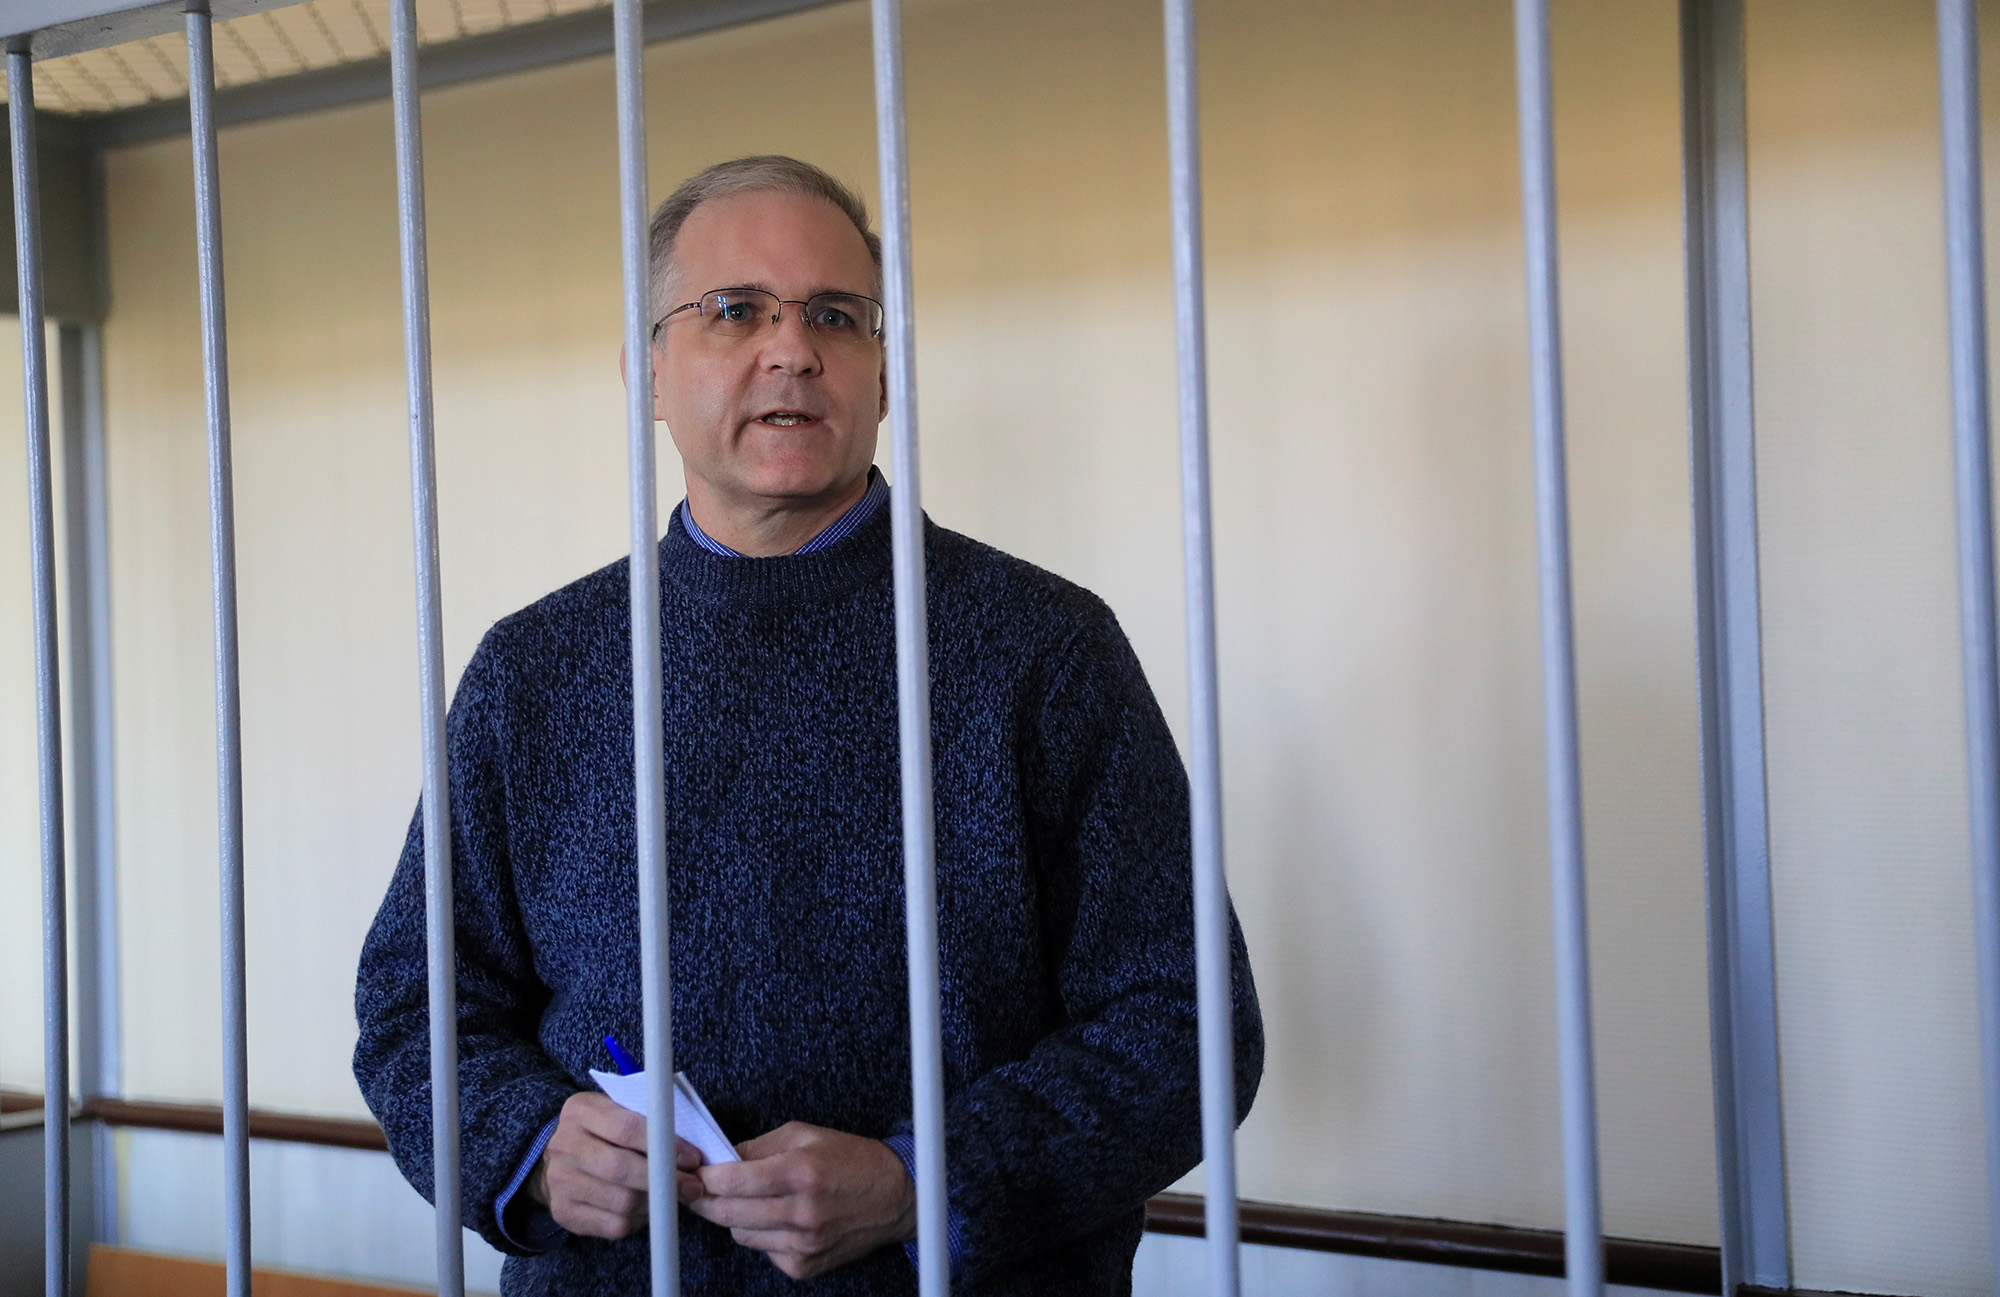 Former U.S. Marine Paul Whelan stands inside a defendants' cage before a court hearing in Moscow, Russia, on August 23, 2019. 